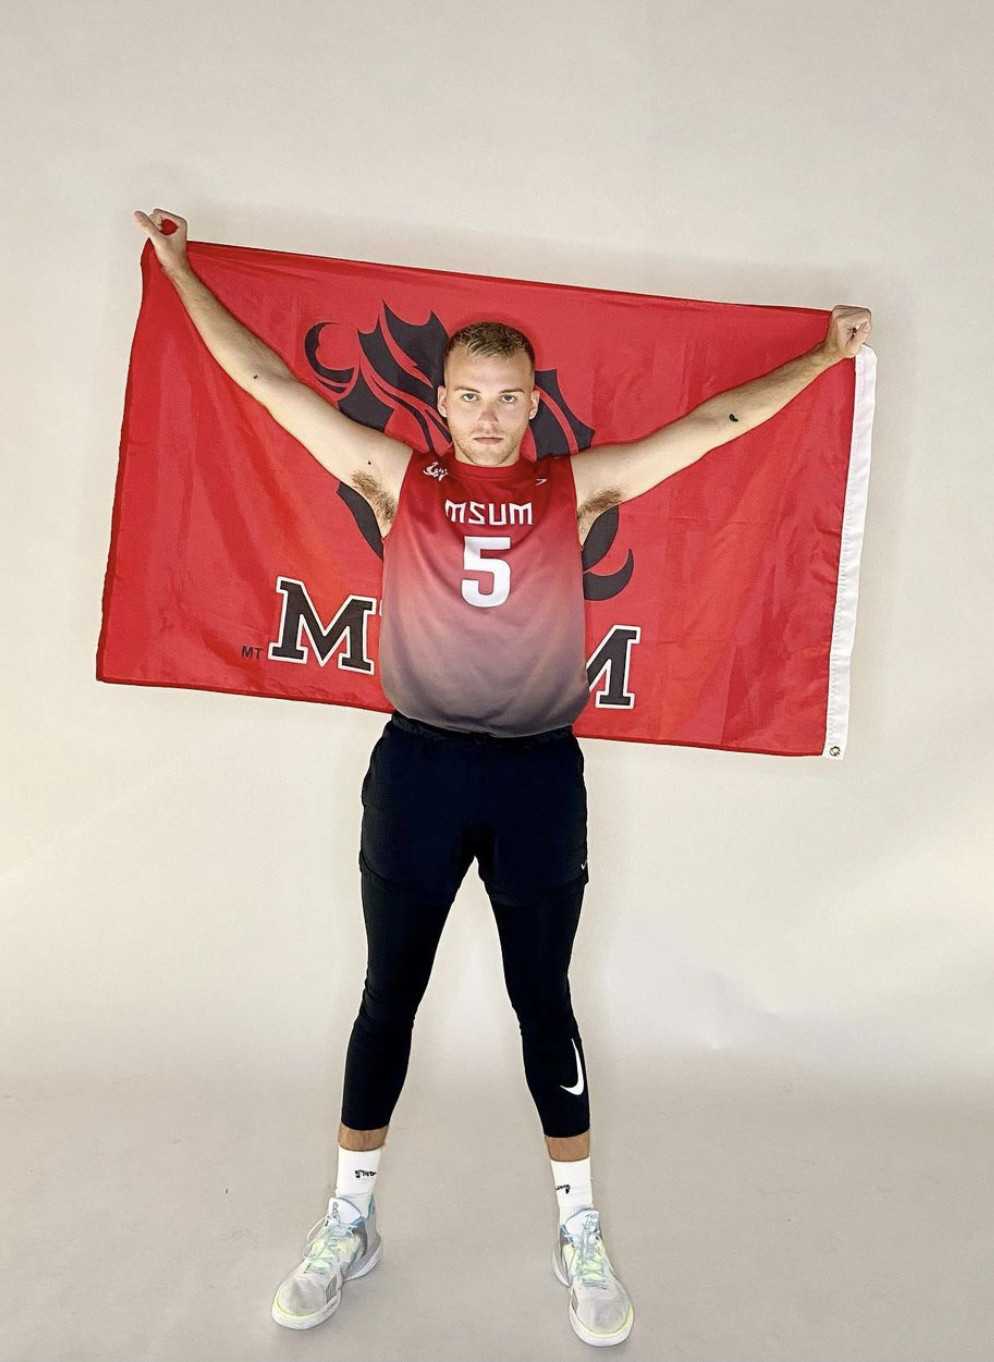 Volleyball player poses with university banner.